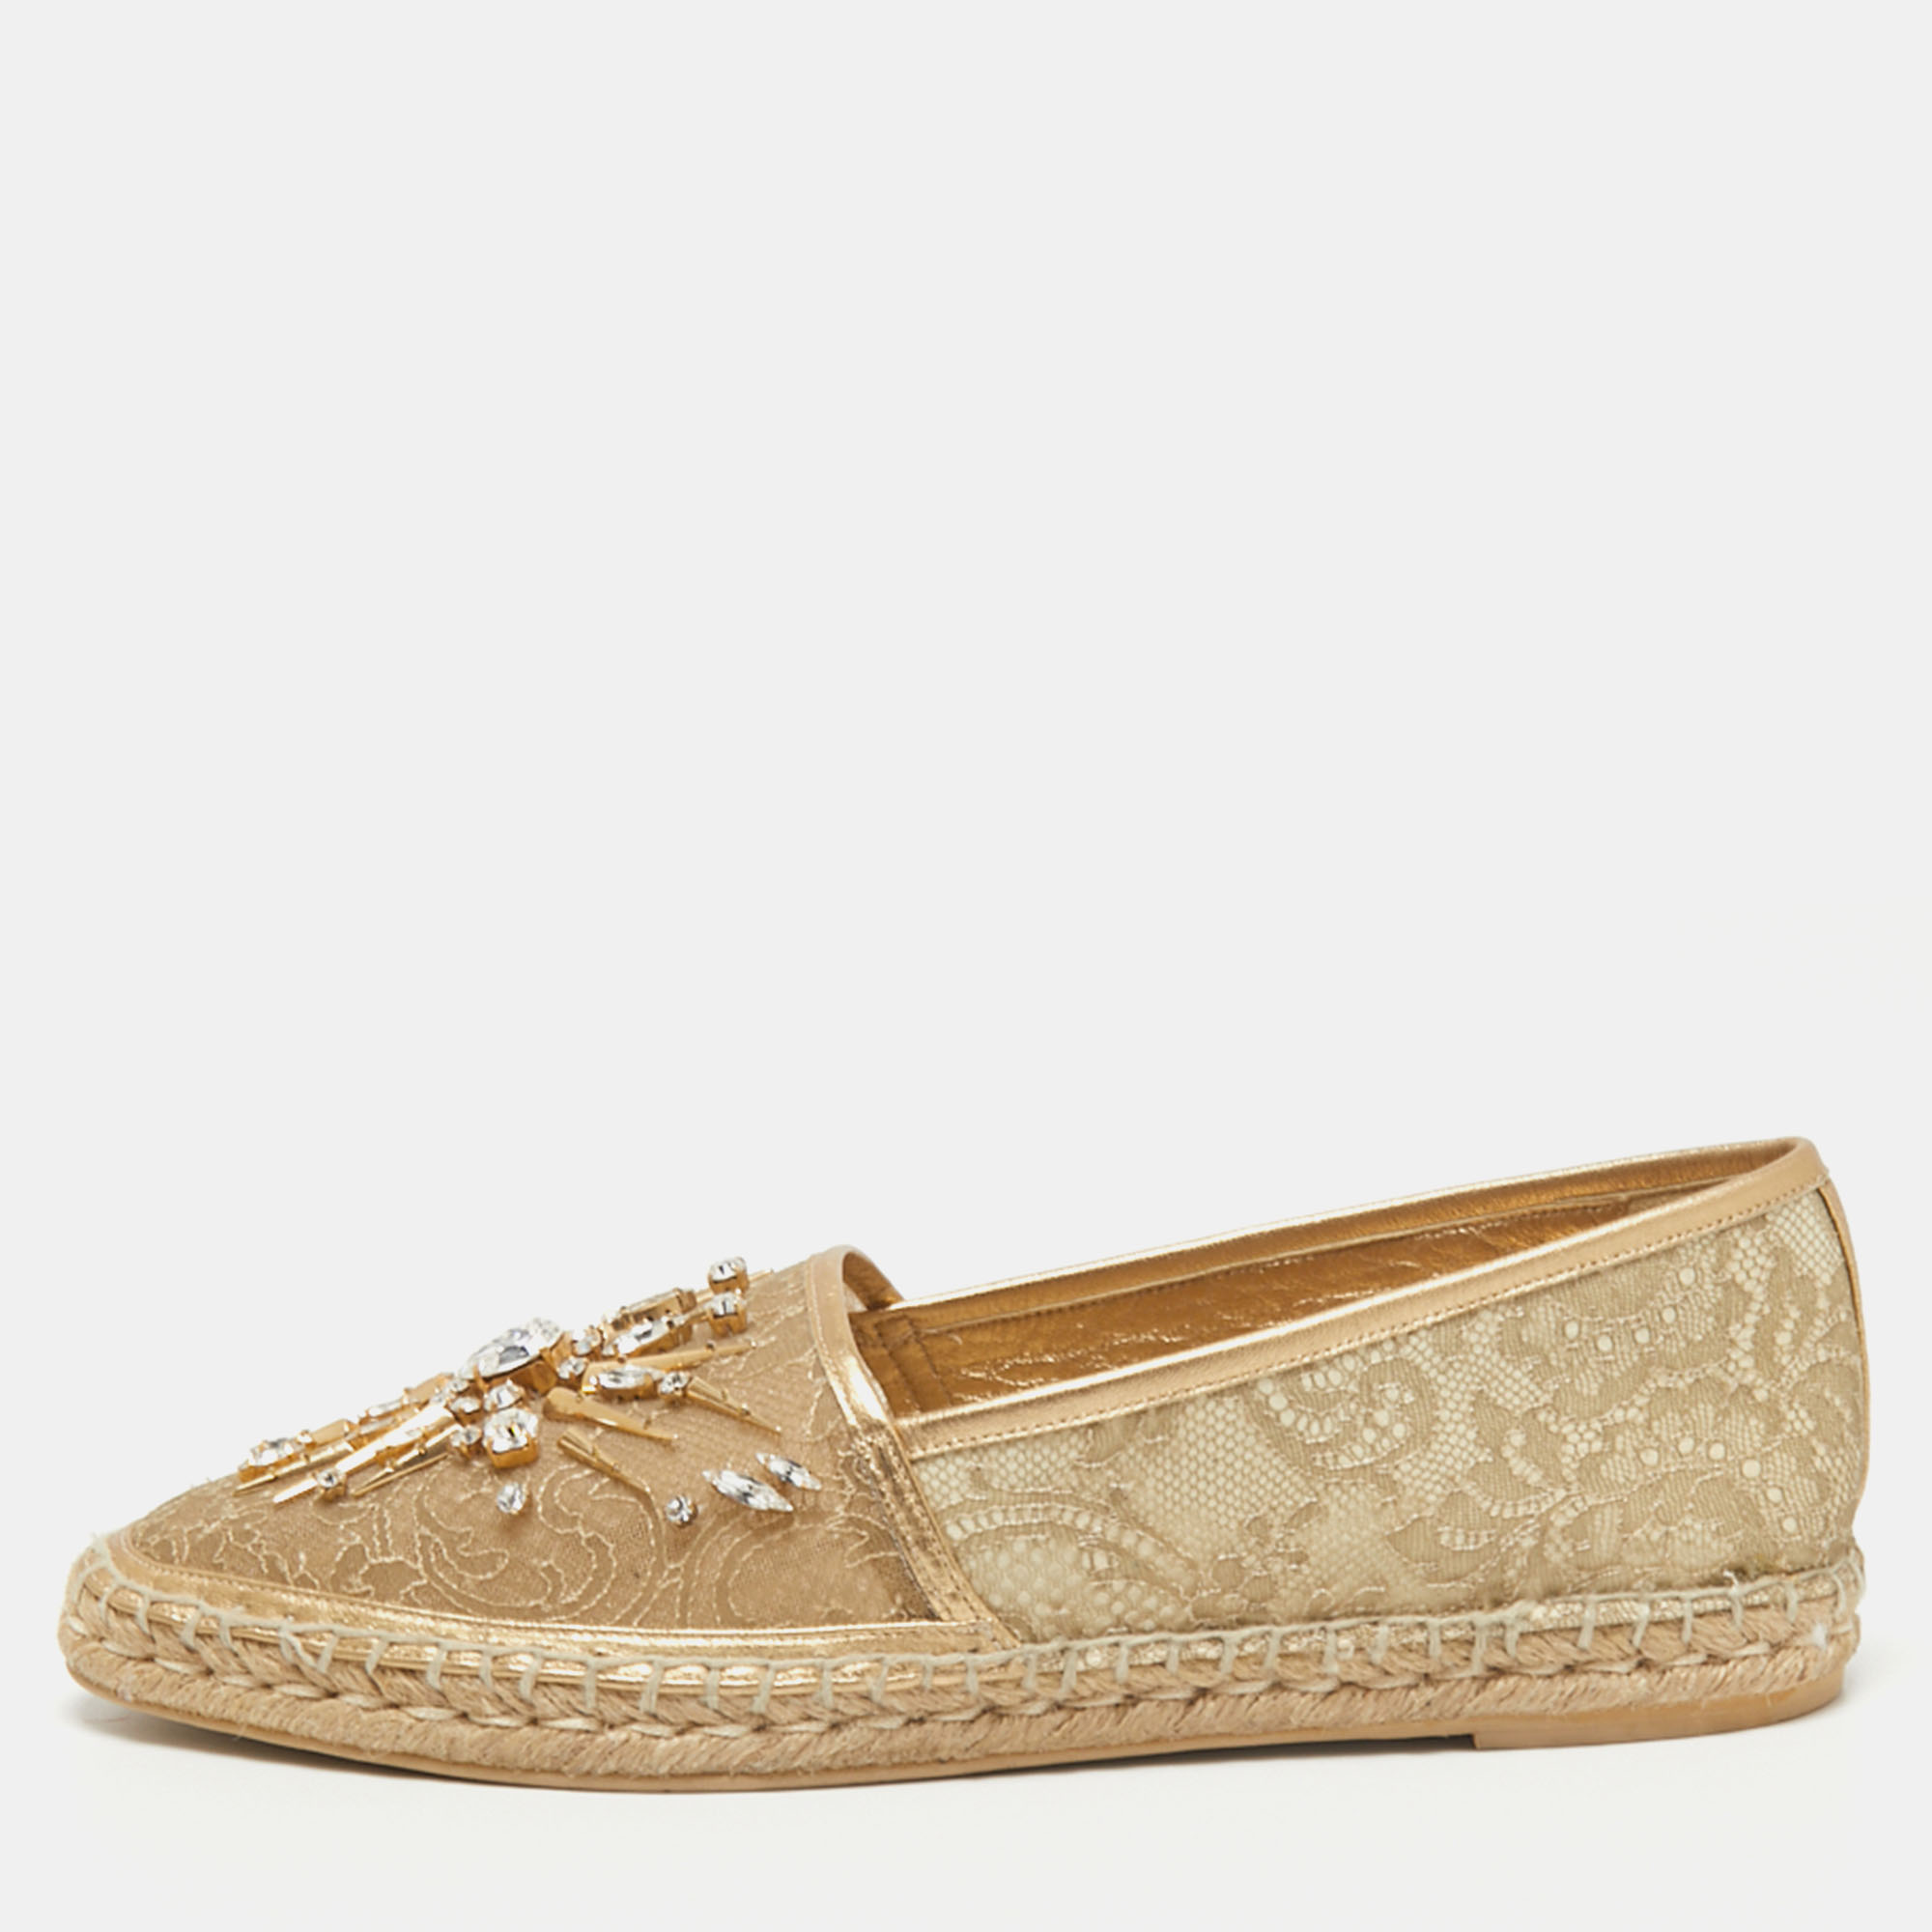 Pre-owned René Caovilla Metallic Gold Lace And Leather Crystal Embellished Espadrille Flats Size 40